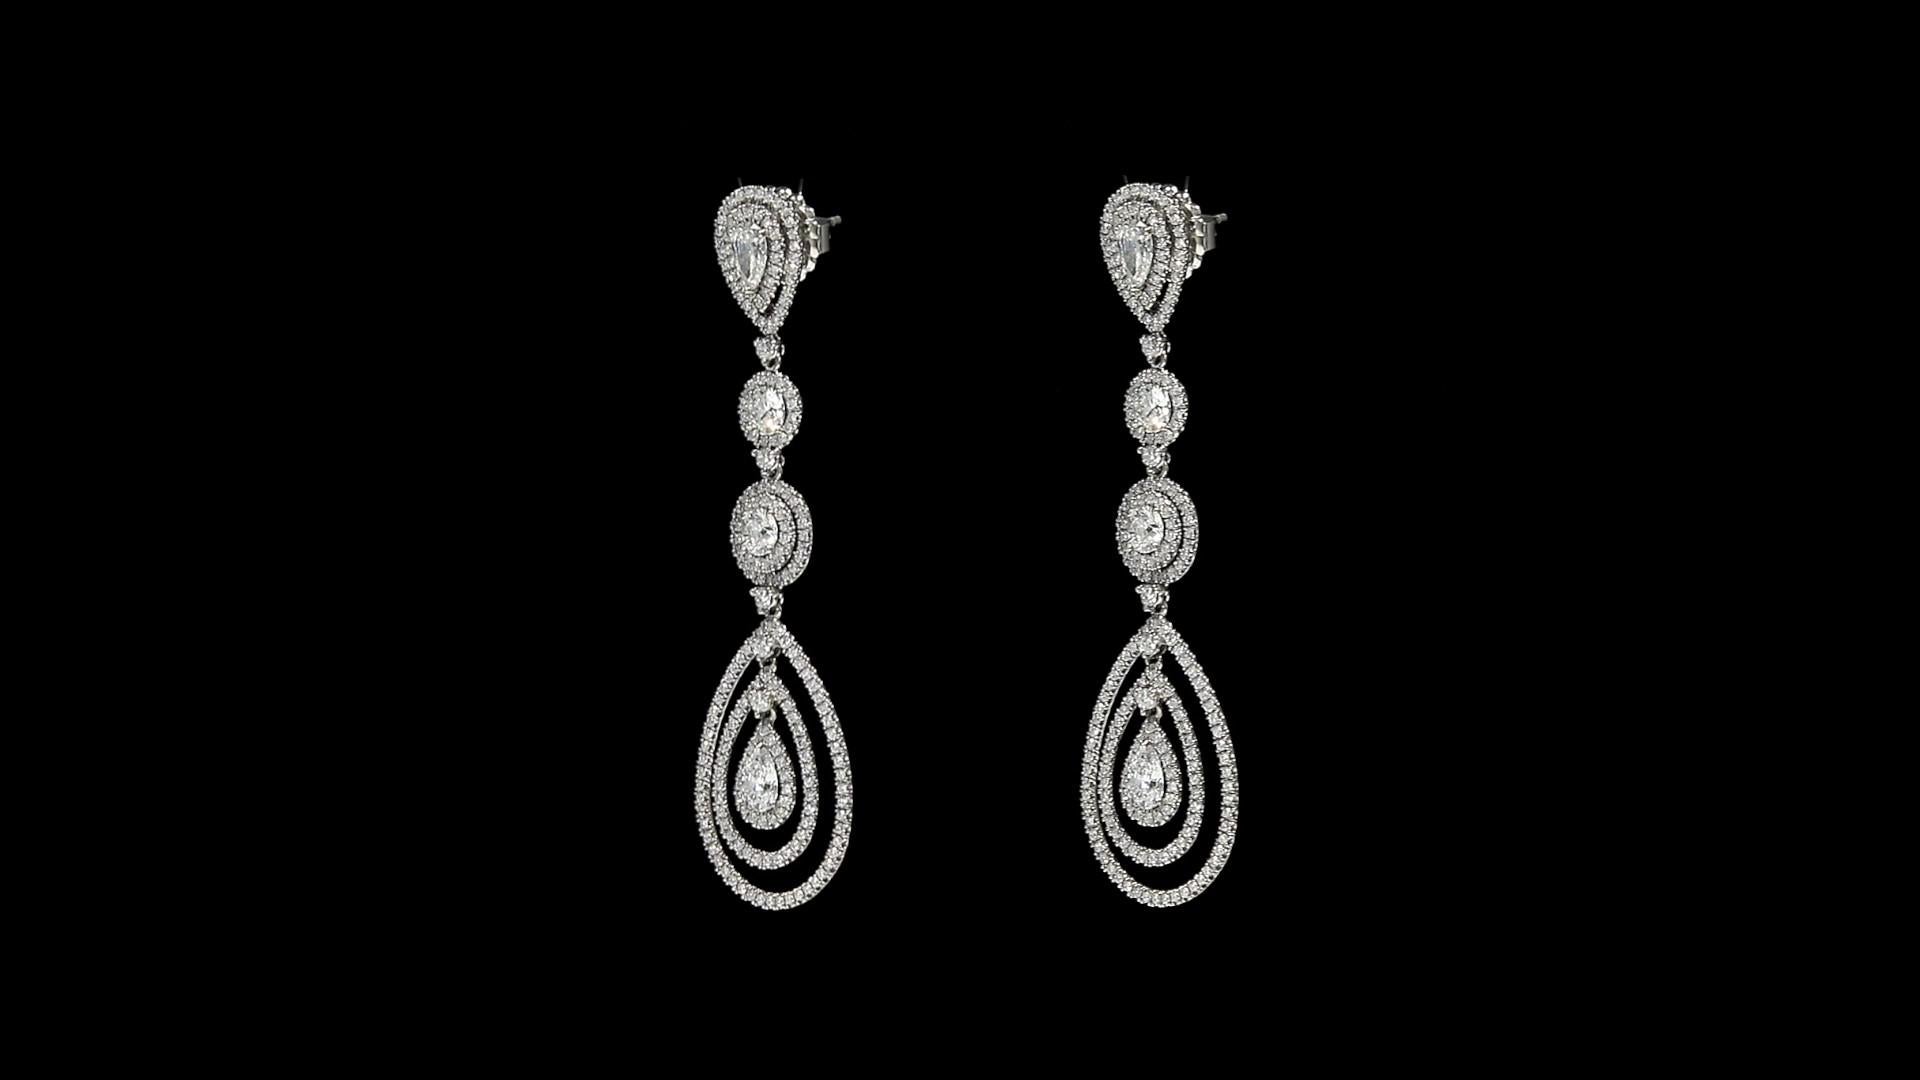 Round Cut Diamond Chandelier Earrings 6.00 Carat Total Weight 18 Karat Gold GIA Certs For Sale